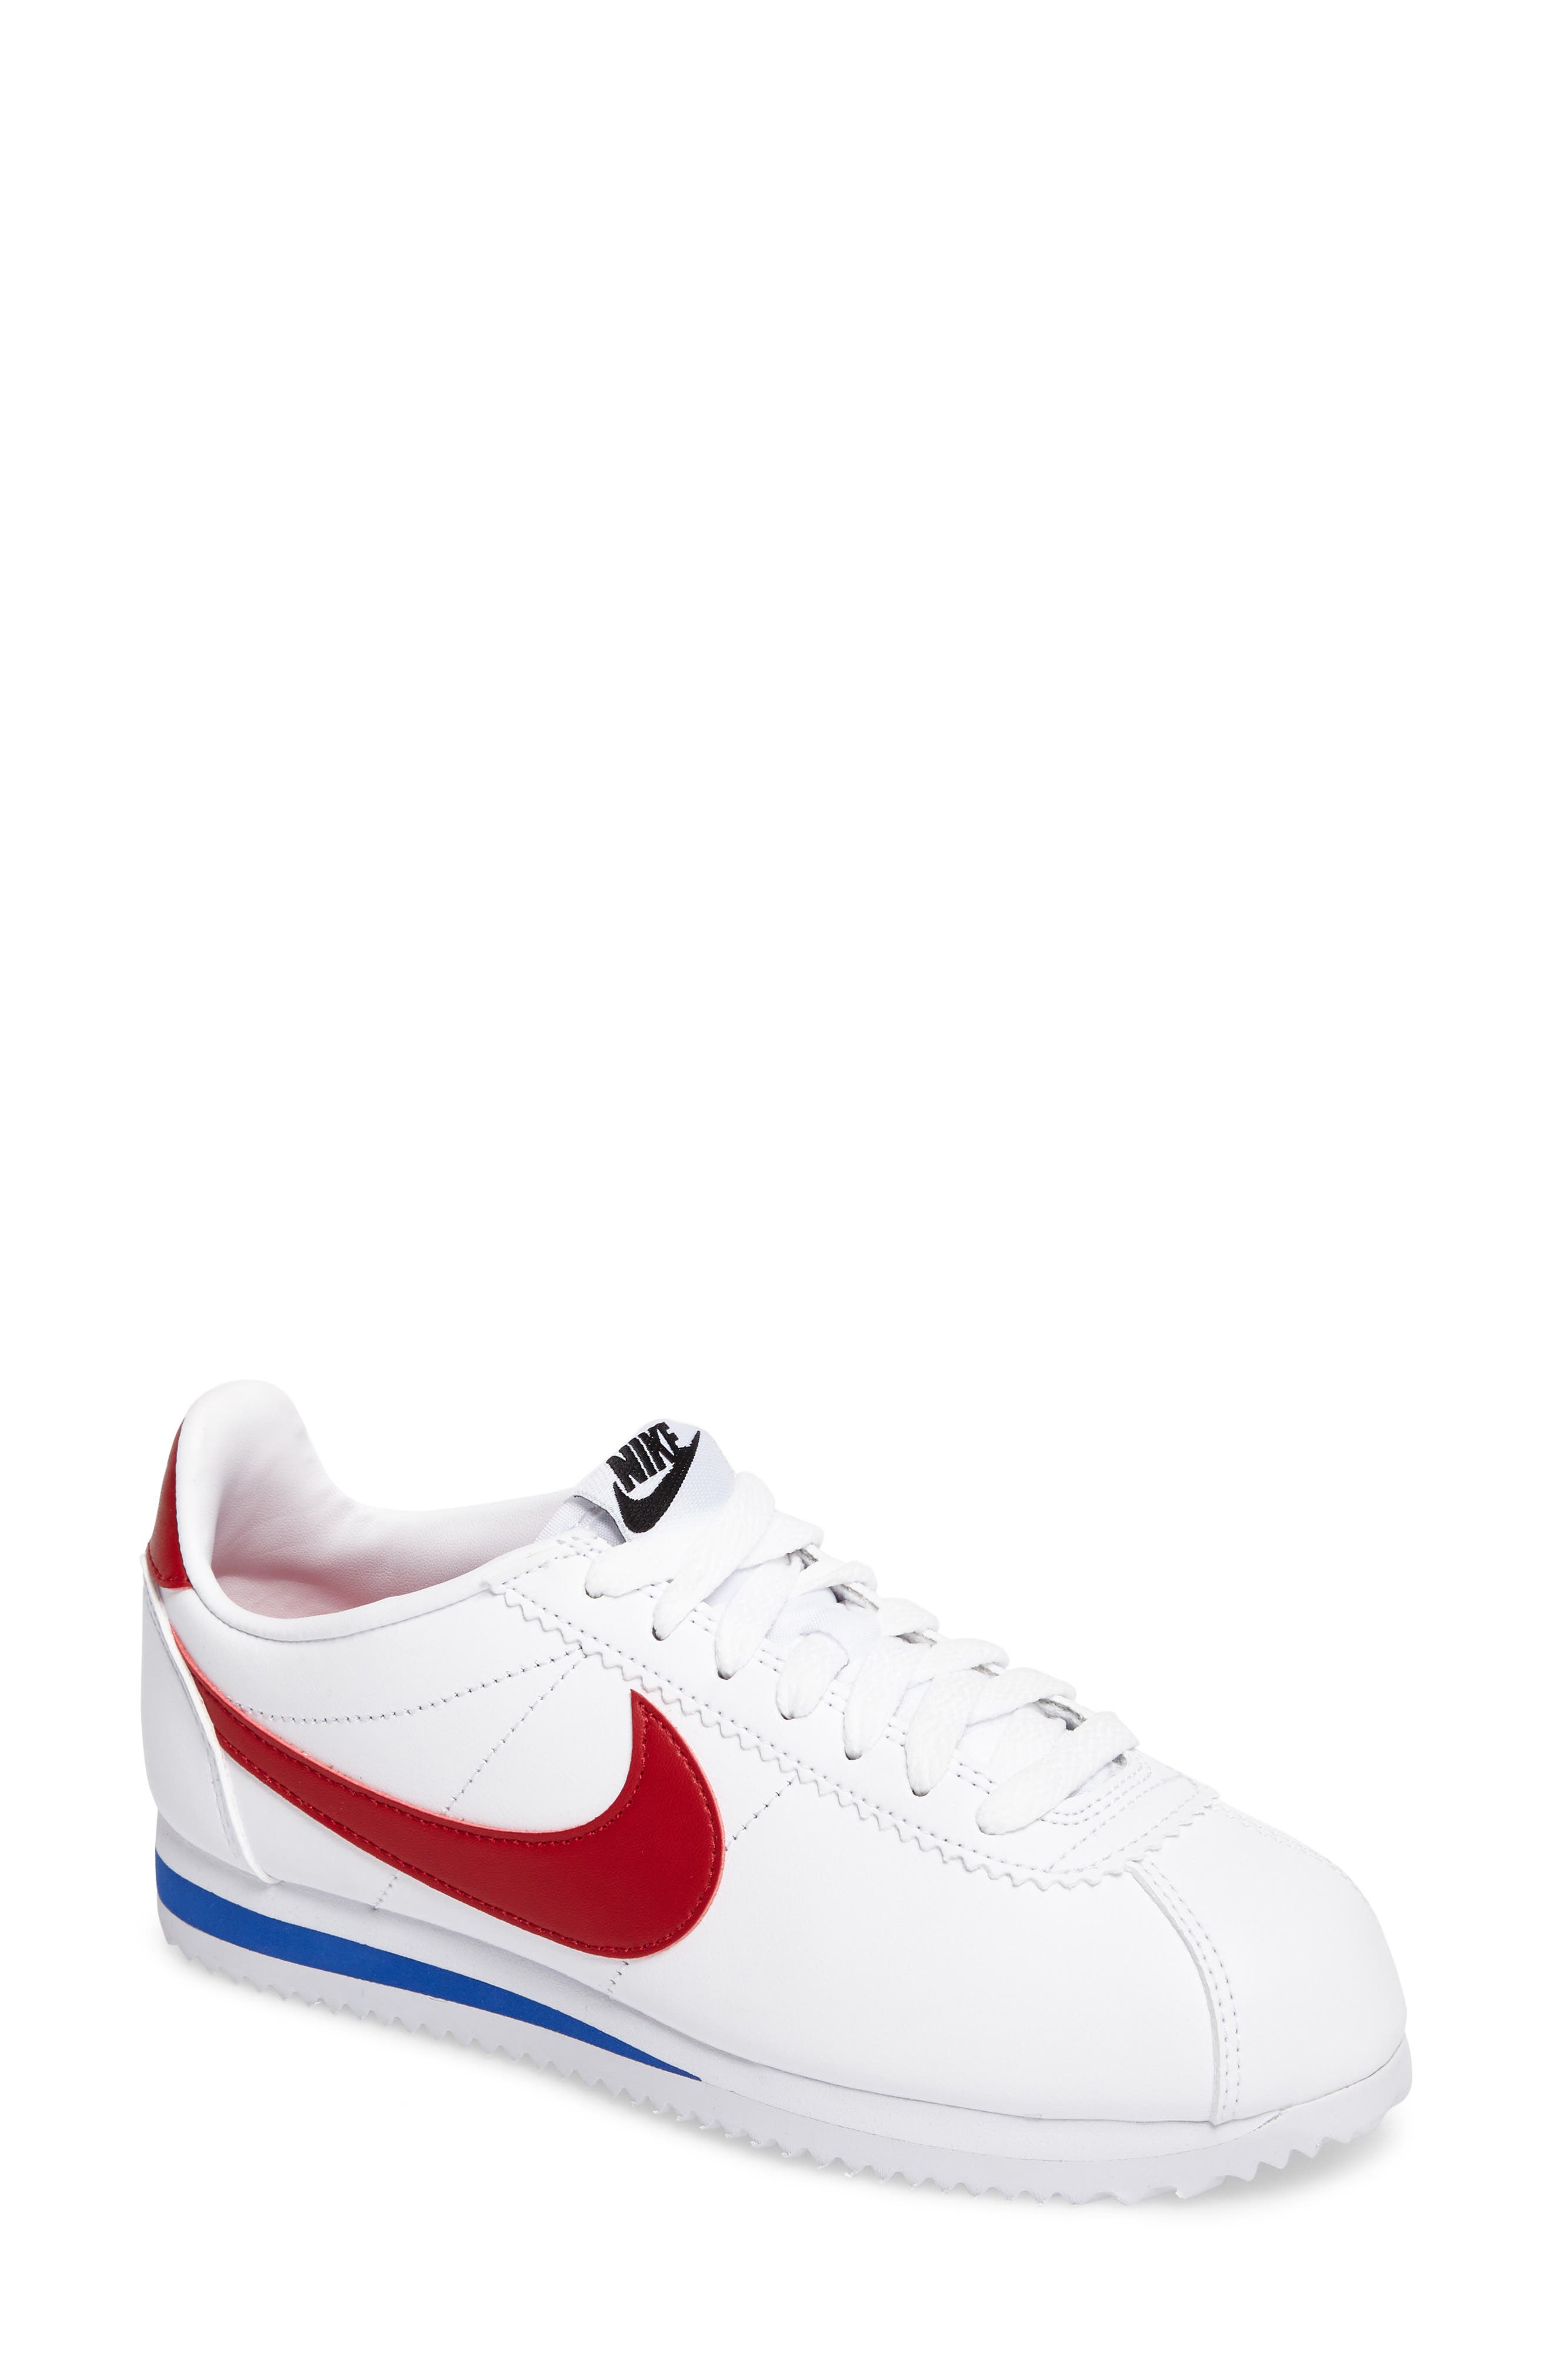 blue red and white nike shoes